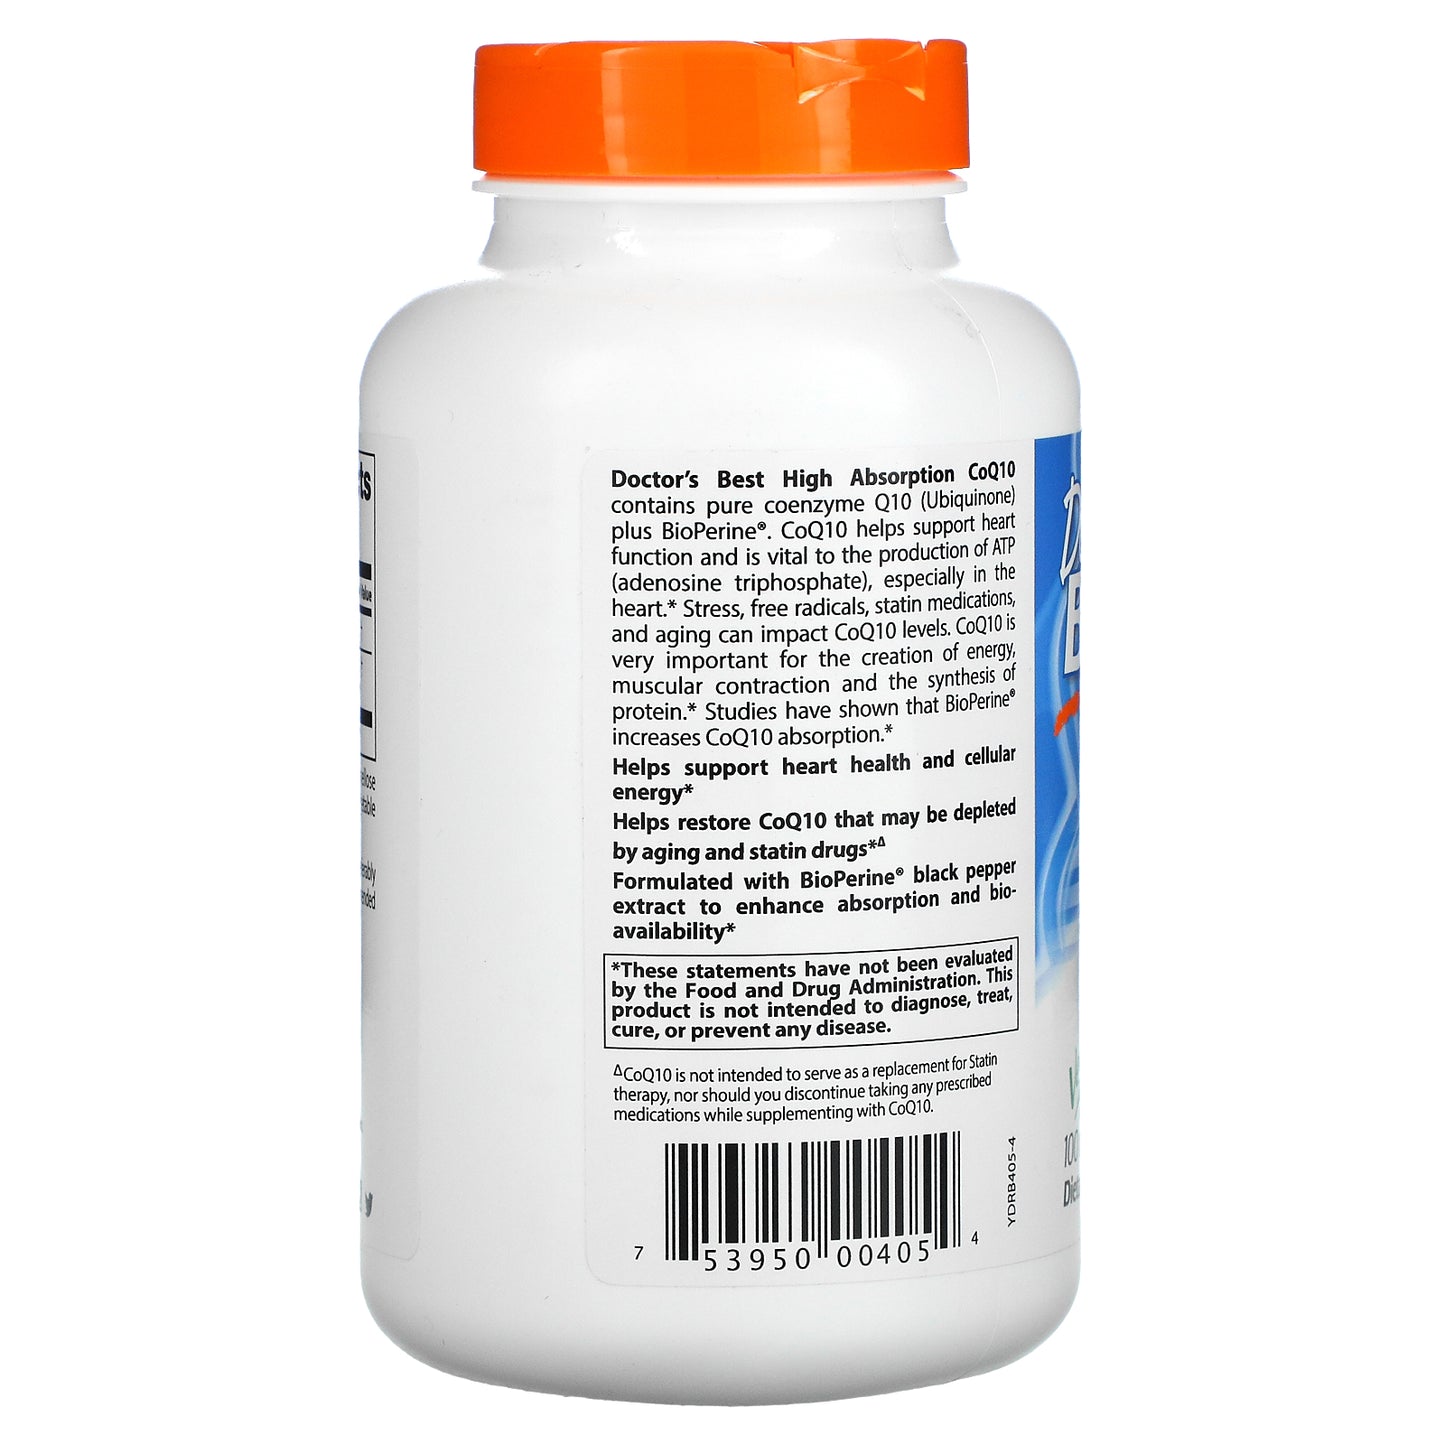 Doctor's Best High Absorption CoQ10 with BioPerine, 100 mg, 360 Veggie Caps